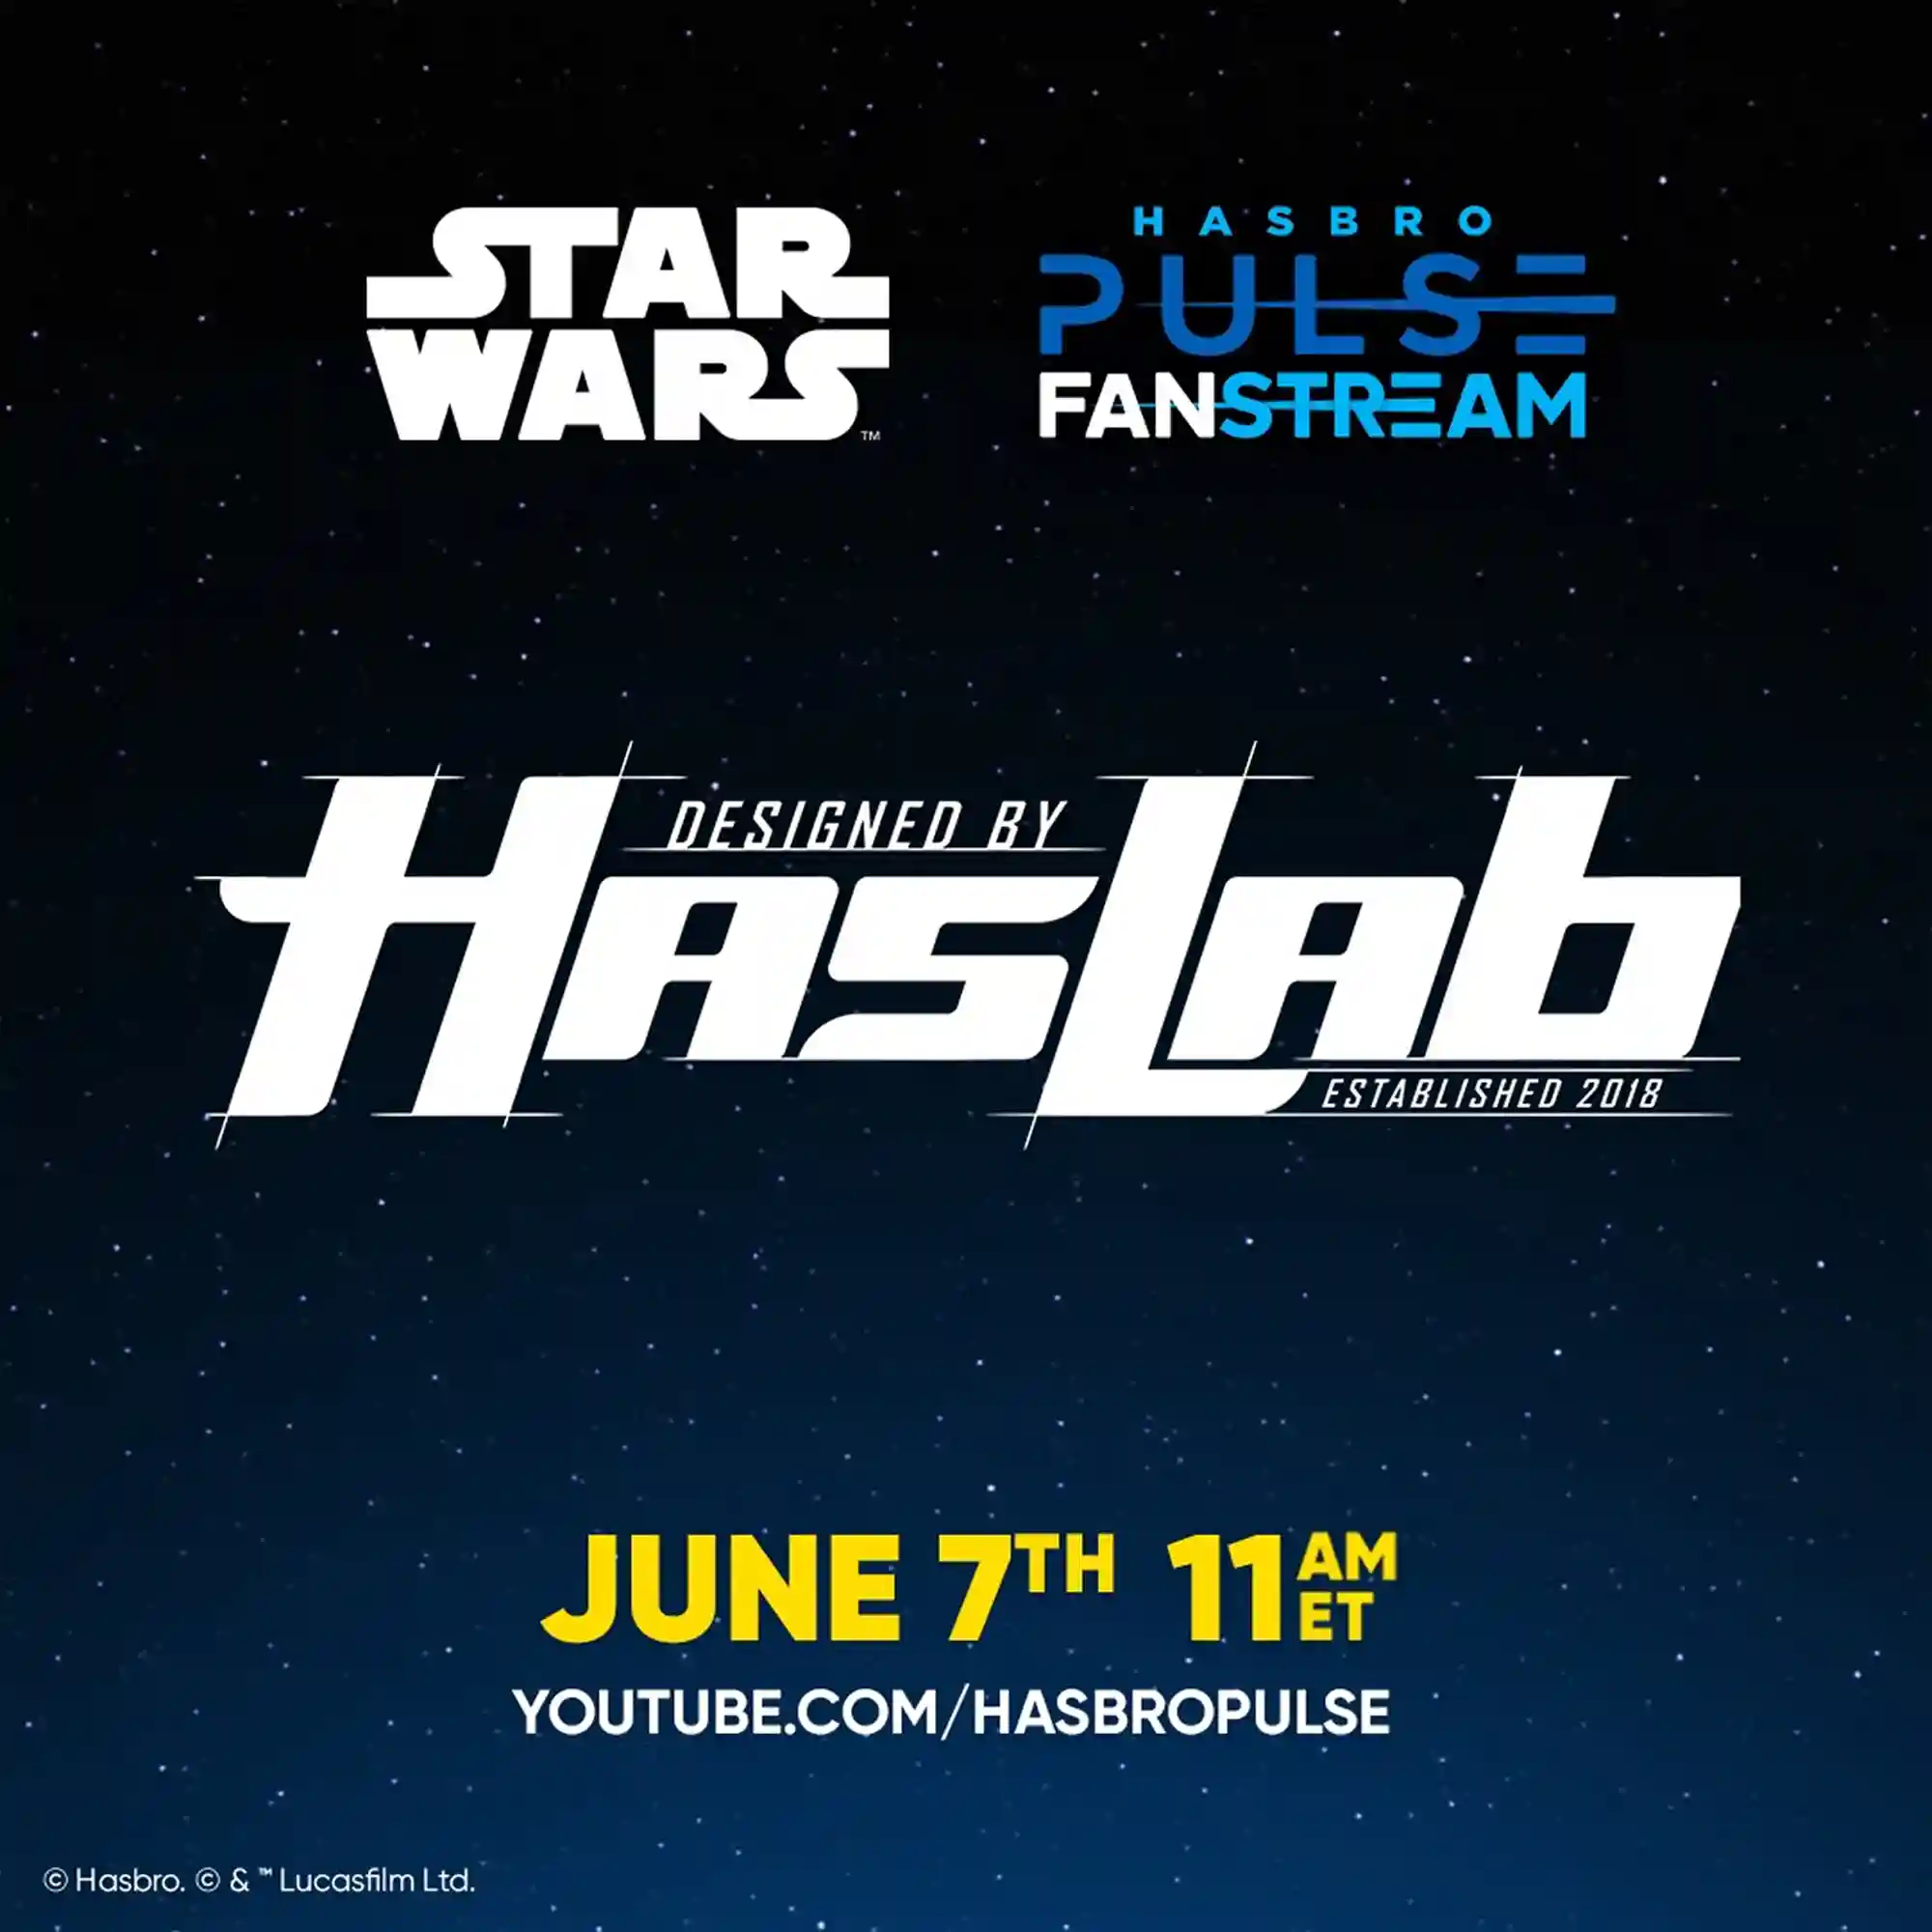 The Next Vintage Collection Haslab Has A New Reveal Date!